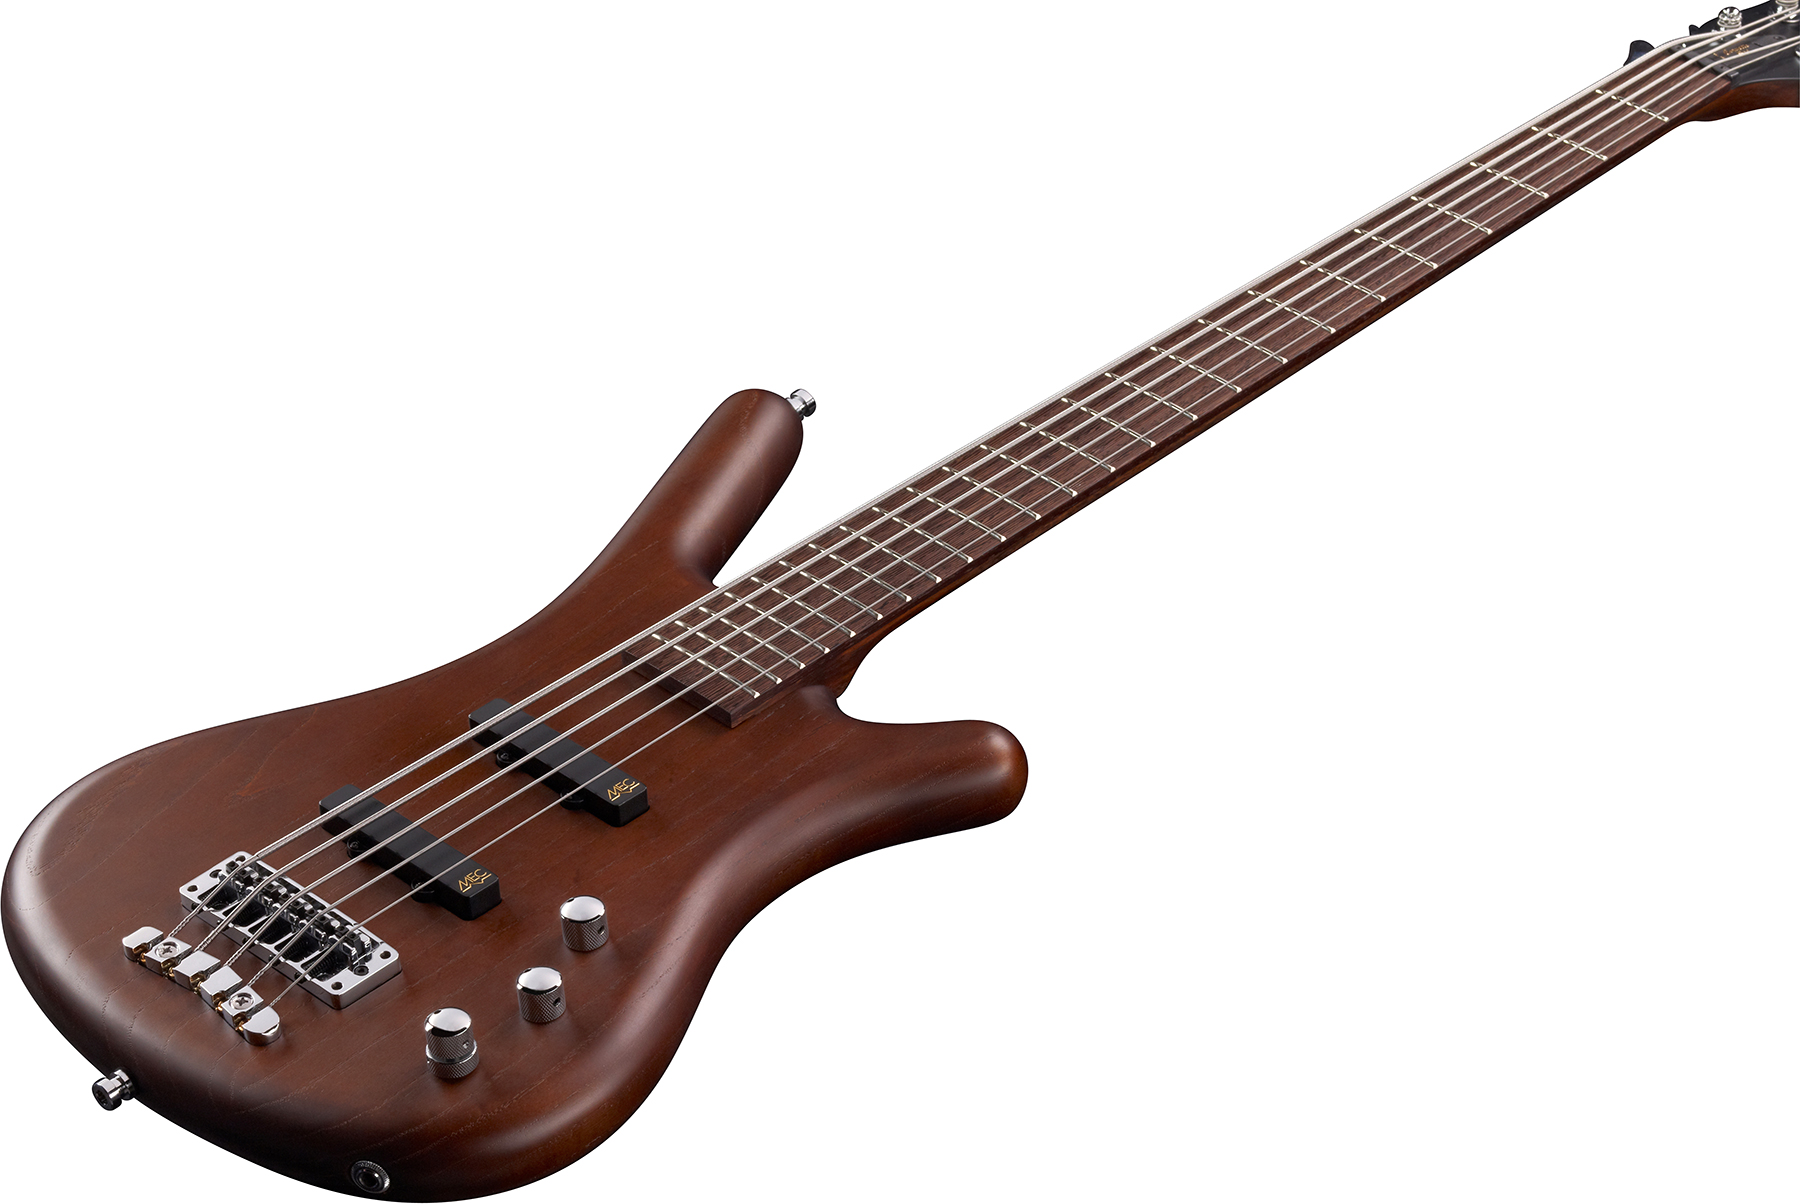 Warwick Corvette Ash 5-string Pro Gps All Active 5c Wen - Antique Tobacco Satin - Solid body electric bass - Variation 2